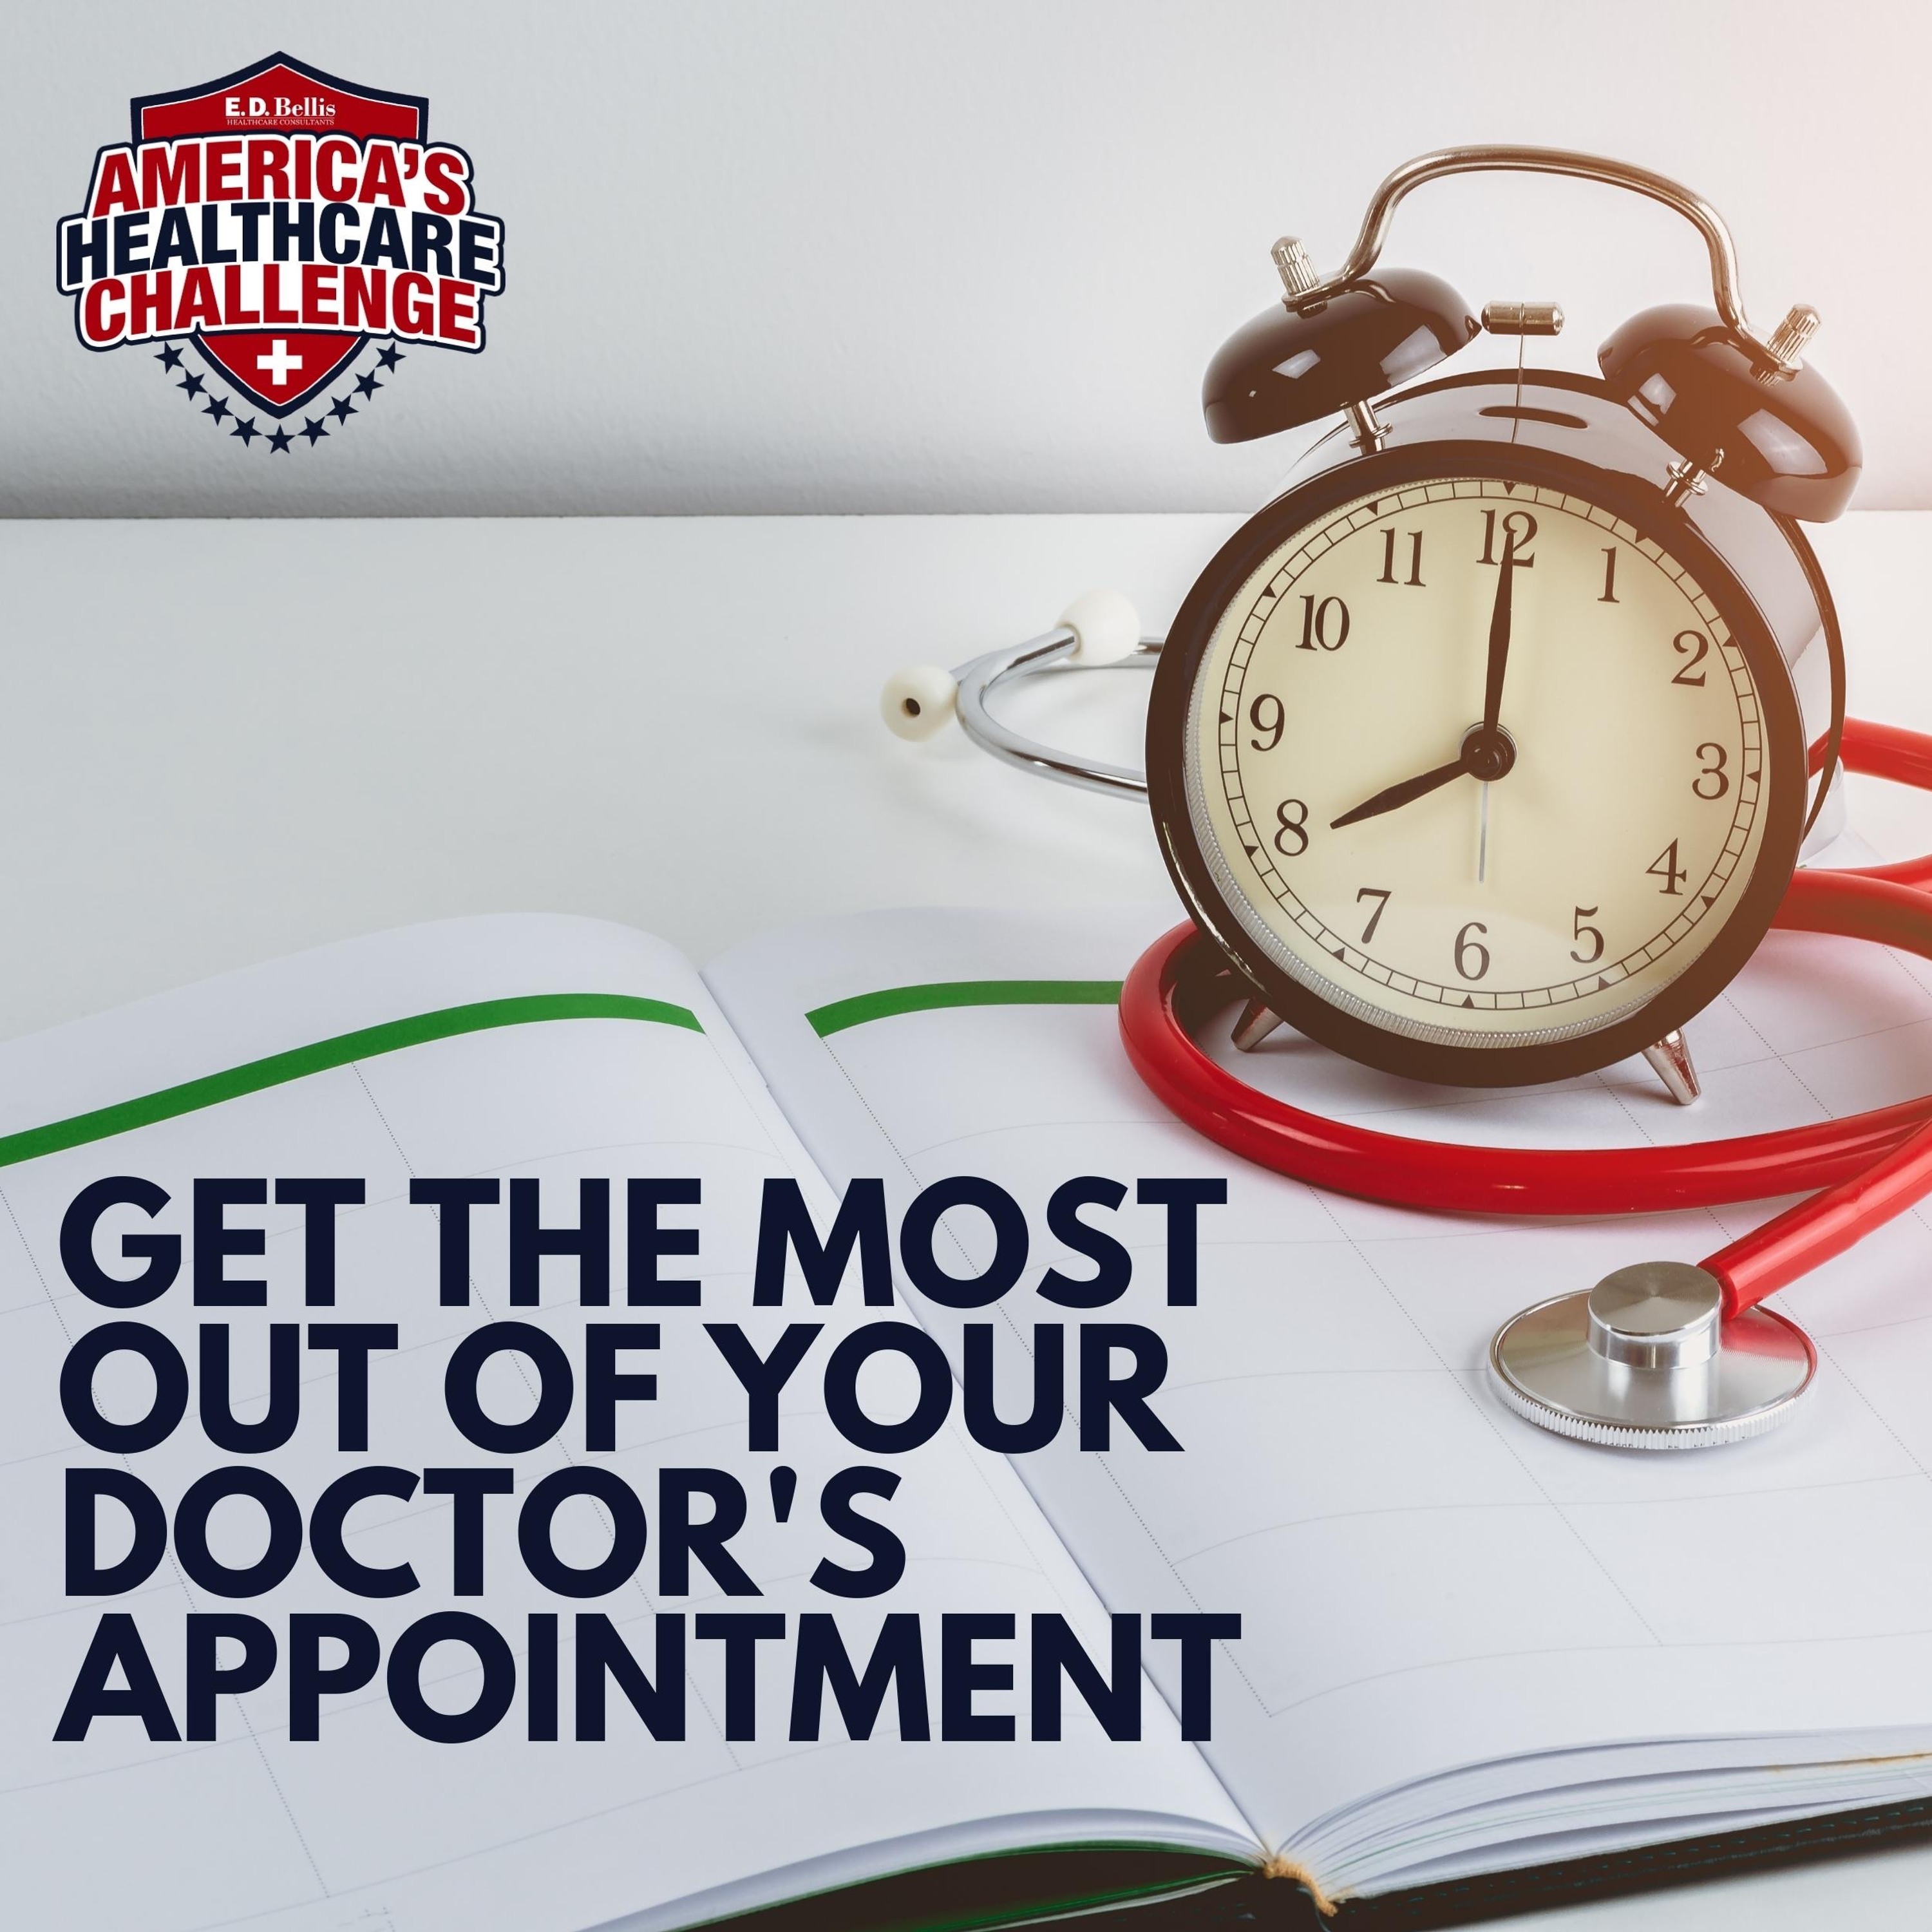 How You Can Get the Most Out of Your Doctor’s Appointment